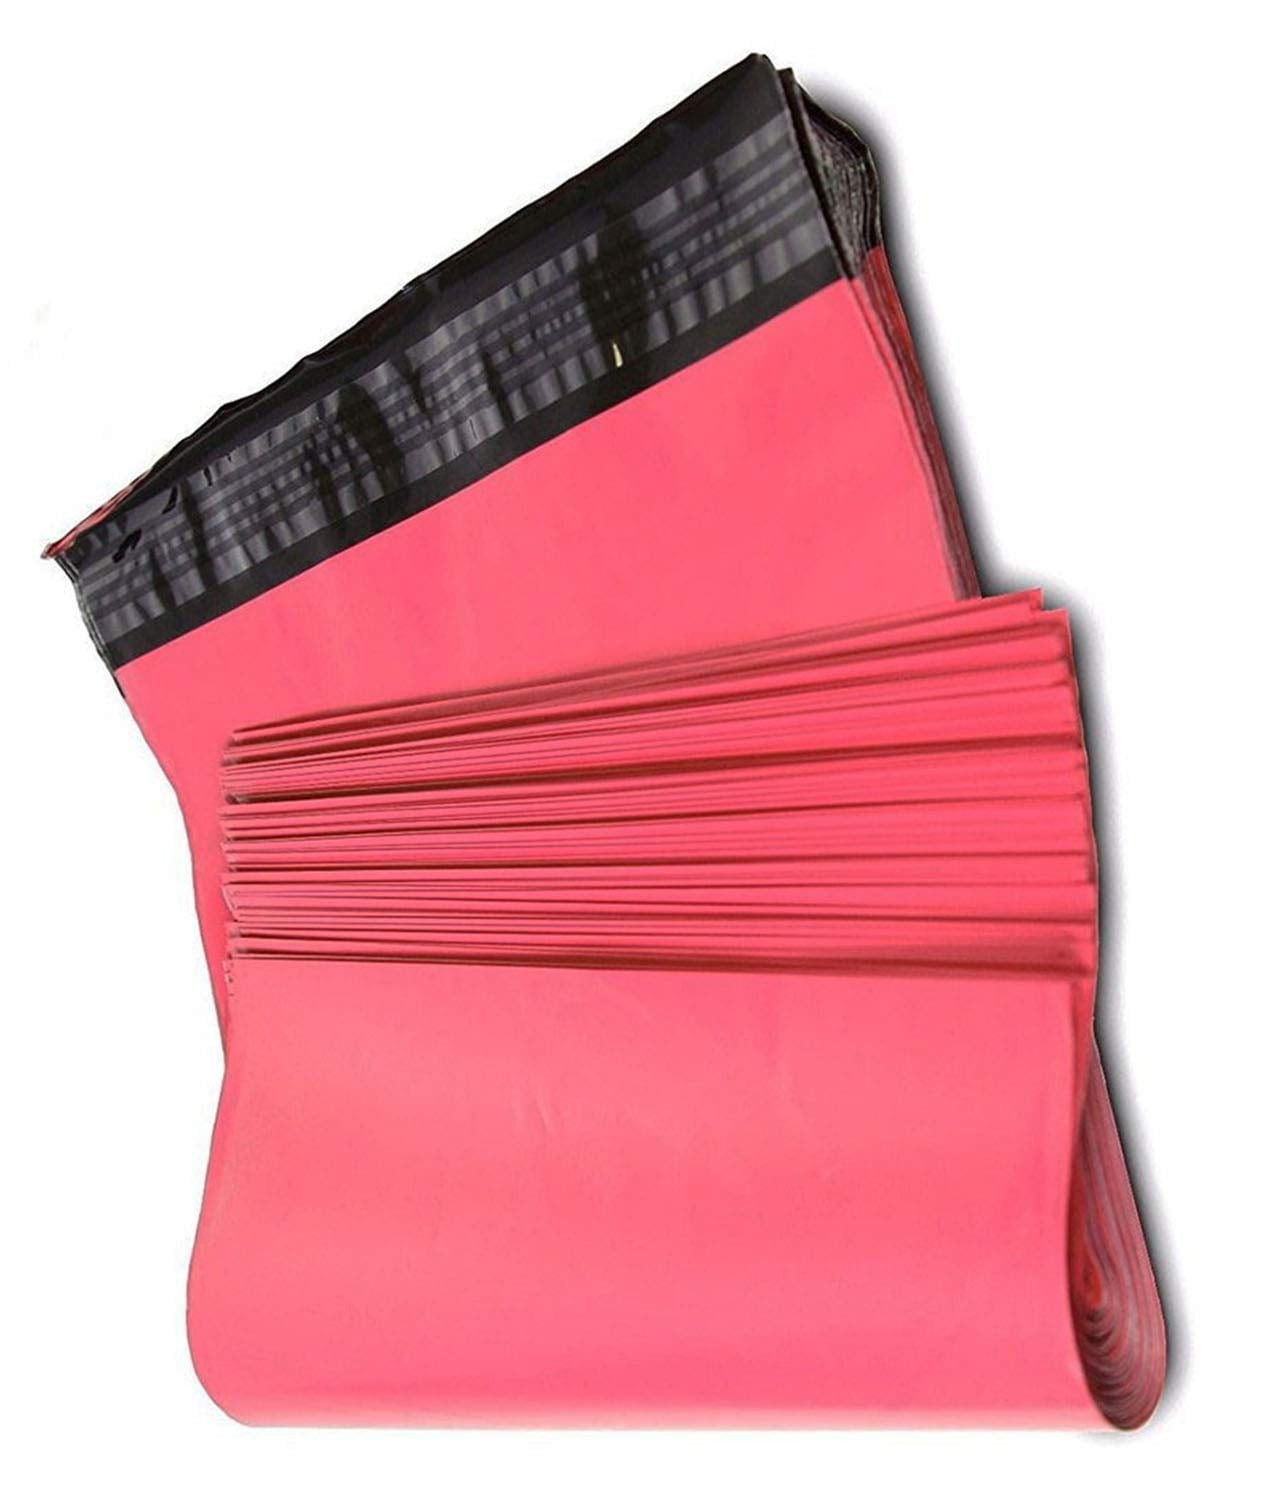 100 10x13 ~ 25 12x15.5 ~ Poly Mailers Envelope Bags Plastic Shipping Bag 10 x 13 